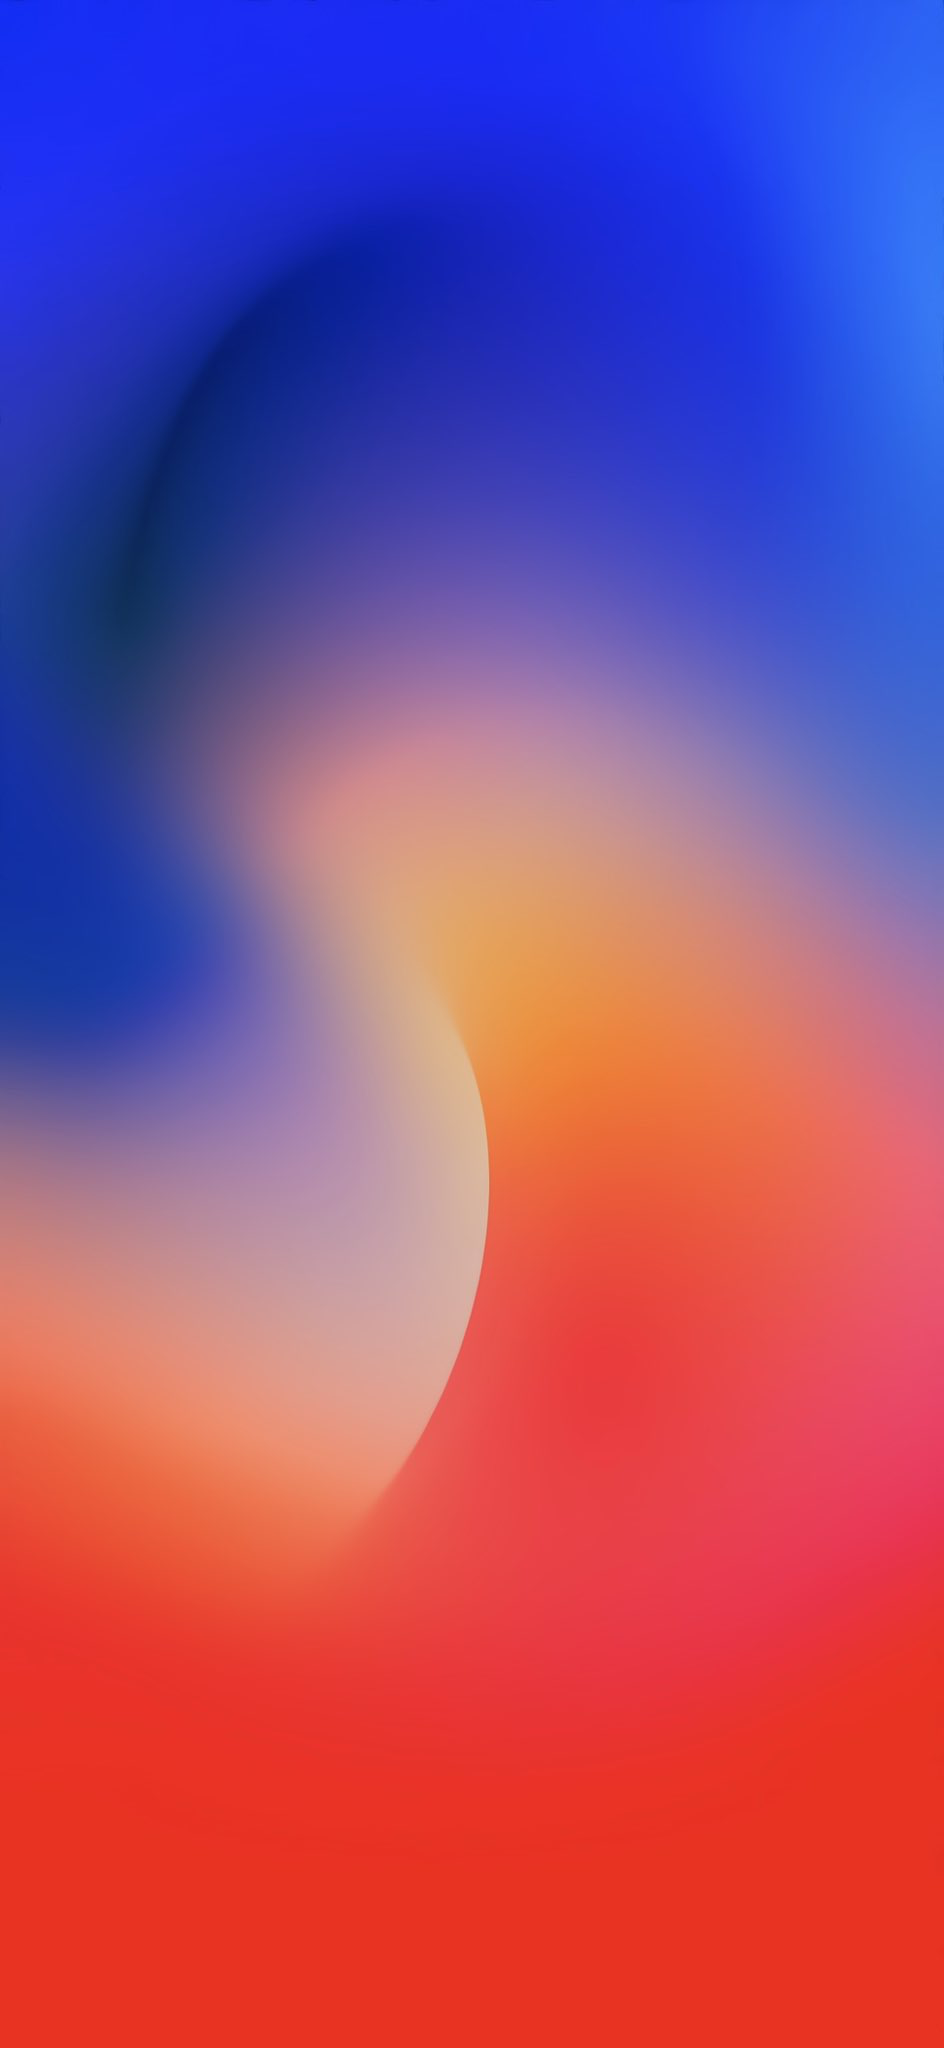 Your favorite iPhone wallpapers of 2022